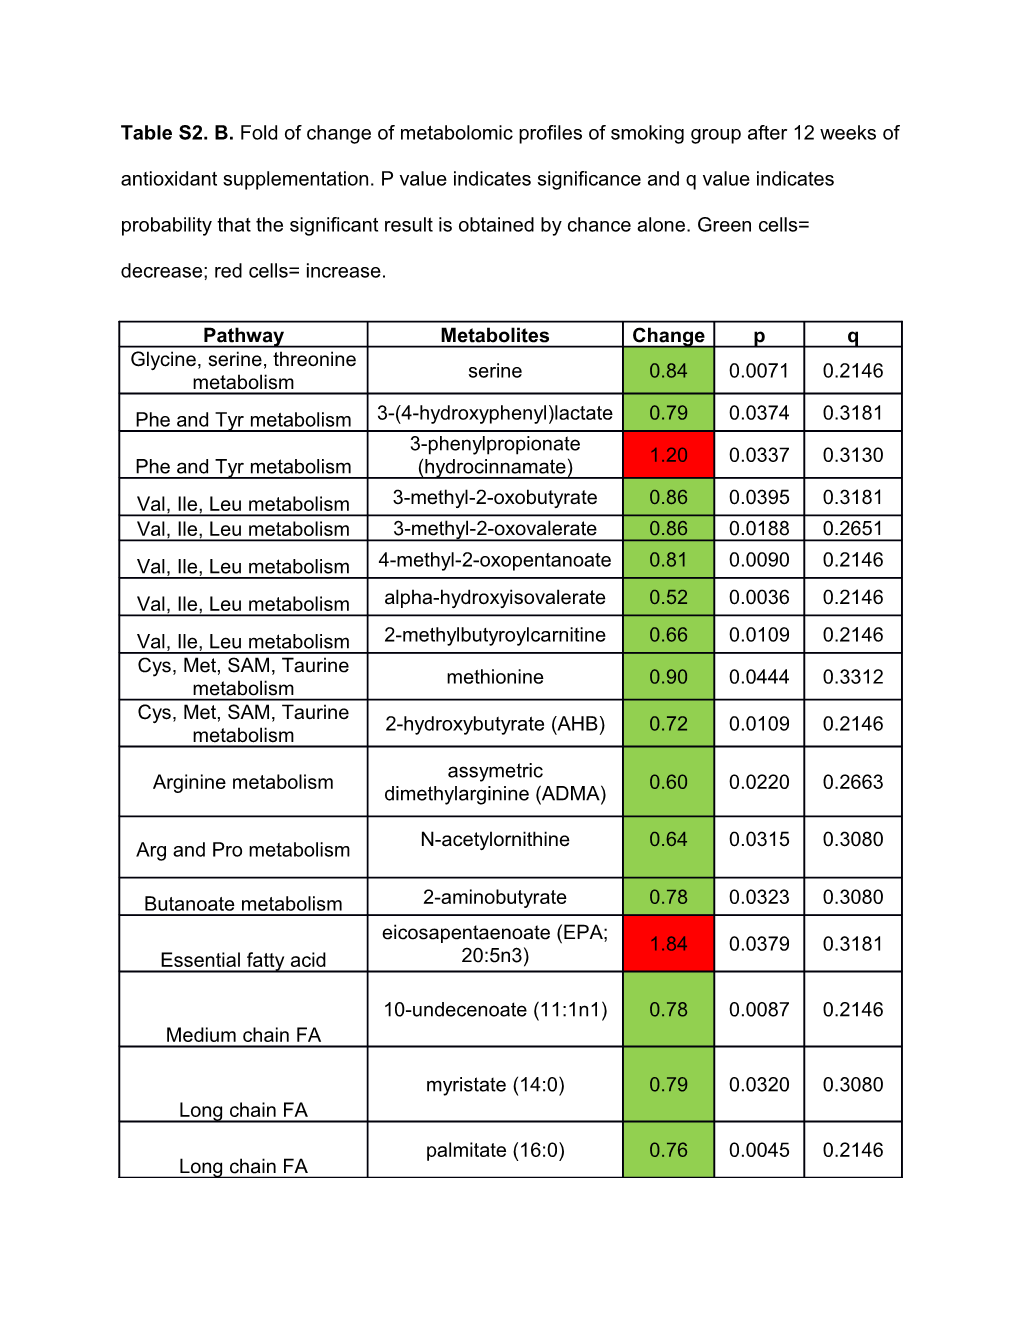 Table S2. A. Adverse Events During Study, by Order of Frequency